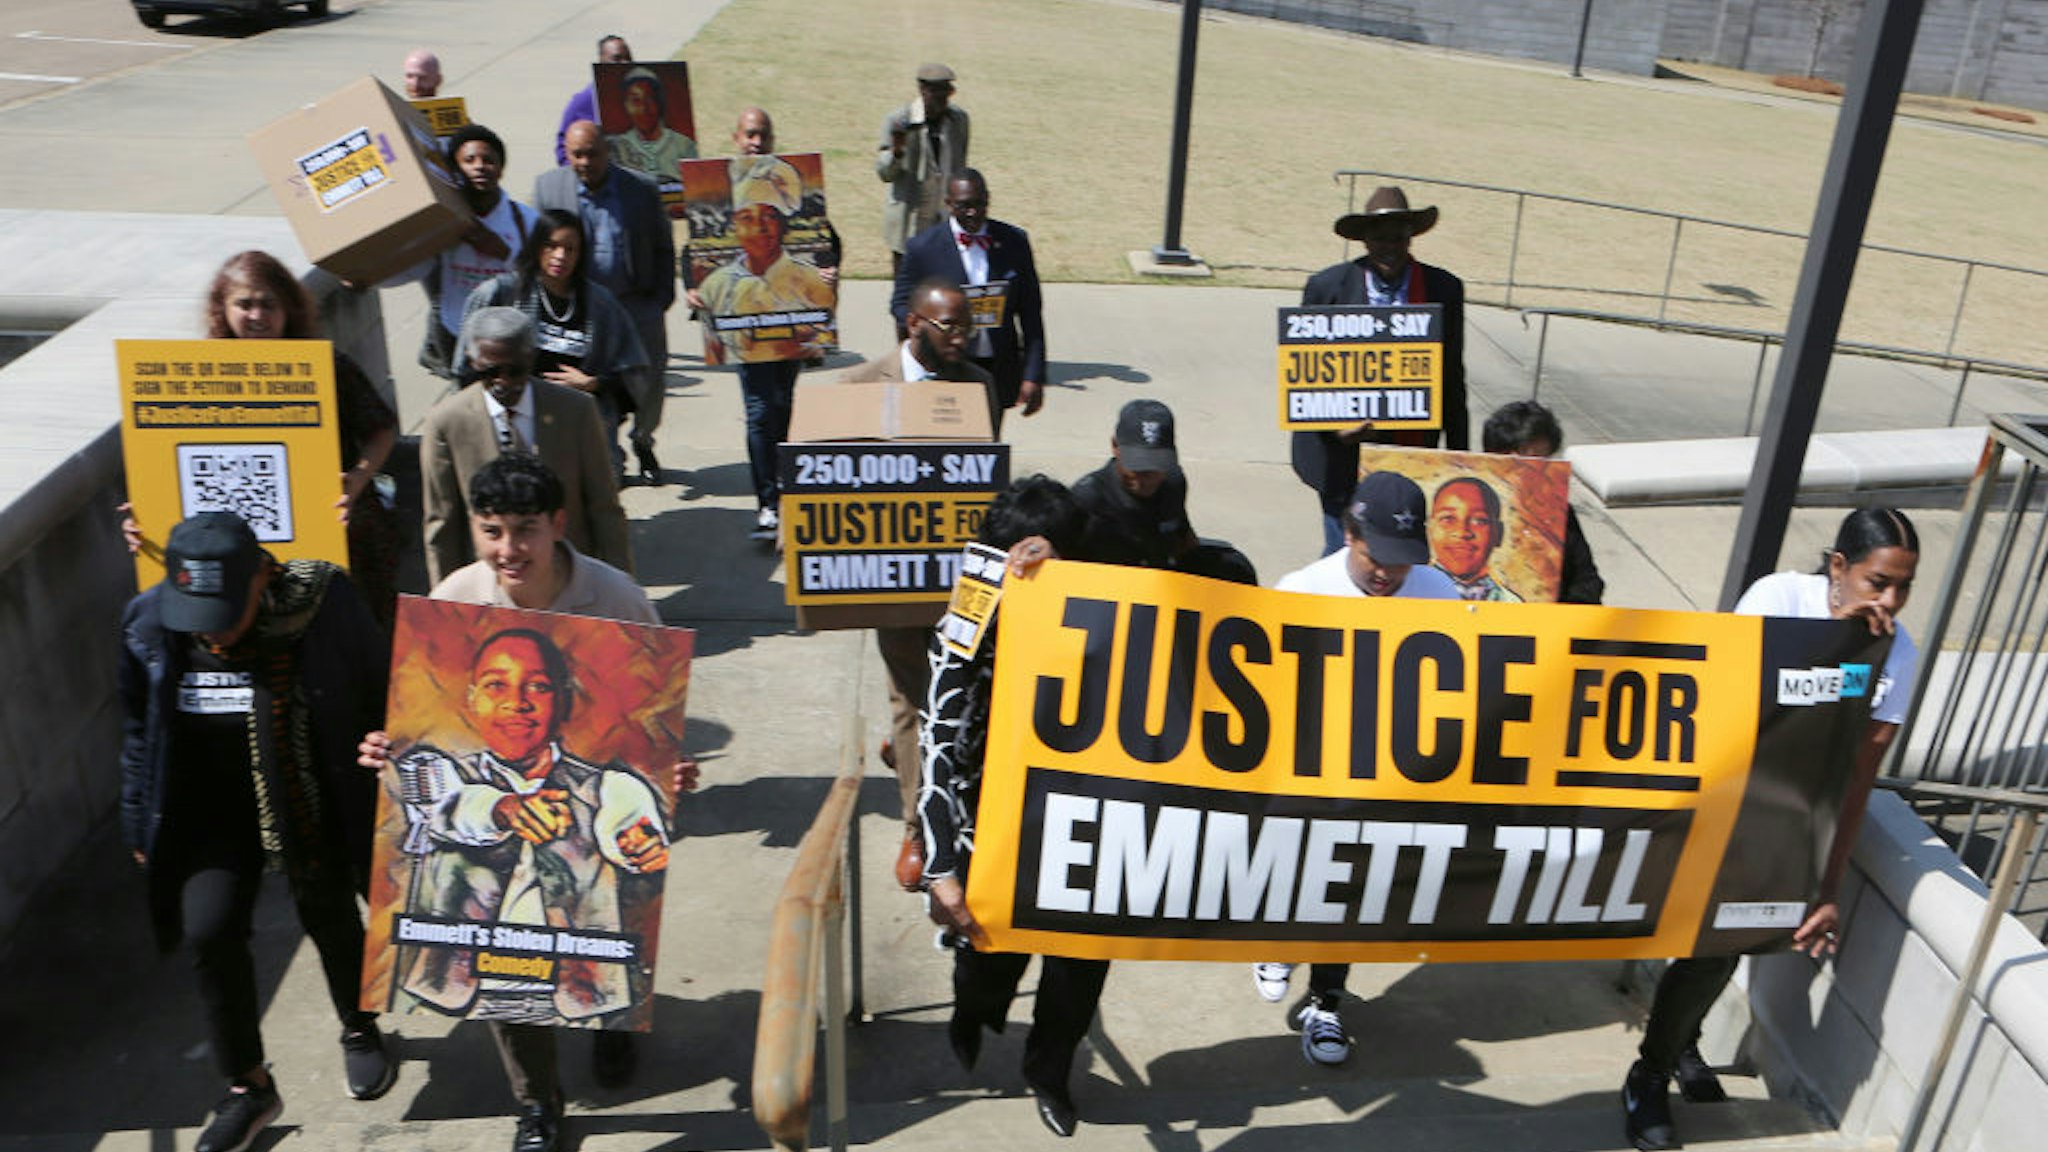 Members of the Emmett Till Legacy Foundation march from the Mississippi State Capitol building onto the the steps of Walter Sillers Building to hand deliver over 300,000 signatures to Lynn Fitch (Mississippi State Attorney General) on March 11, 2022 in Jackson, Mississippi.